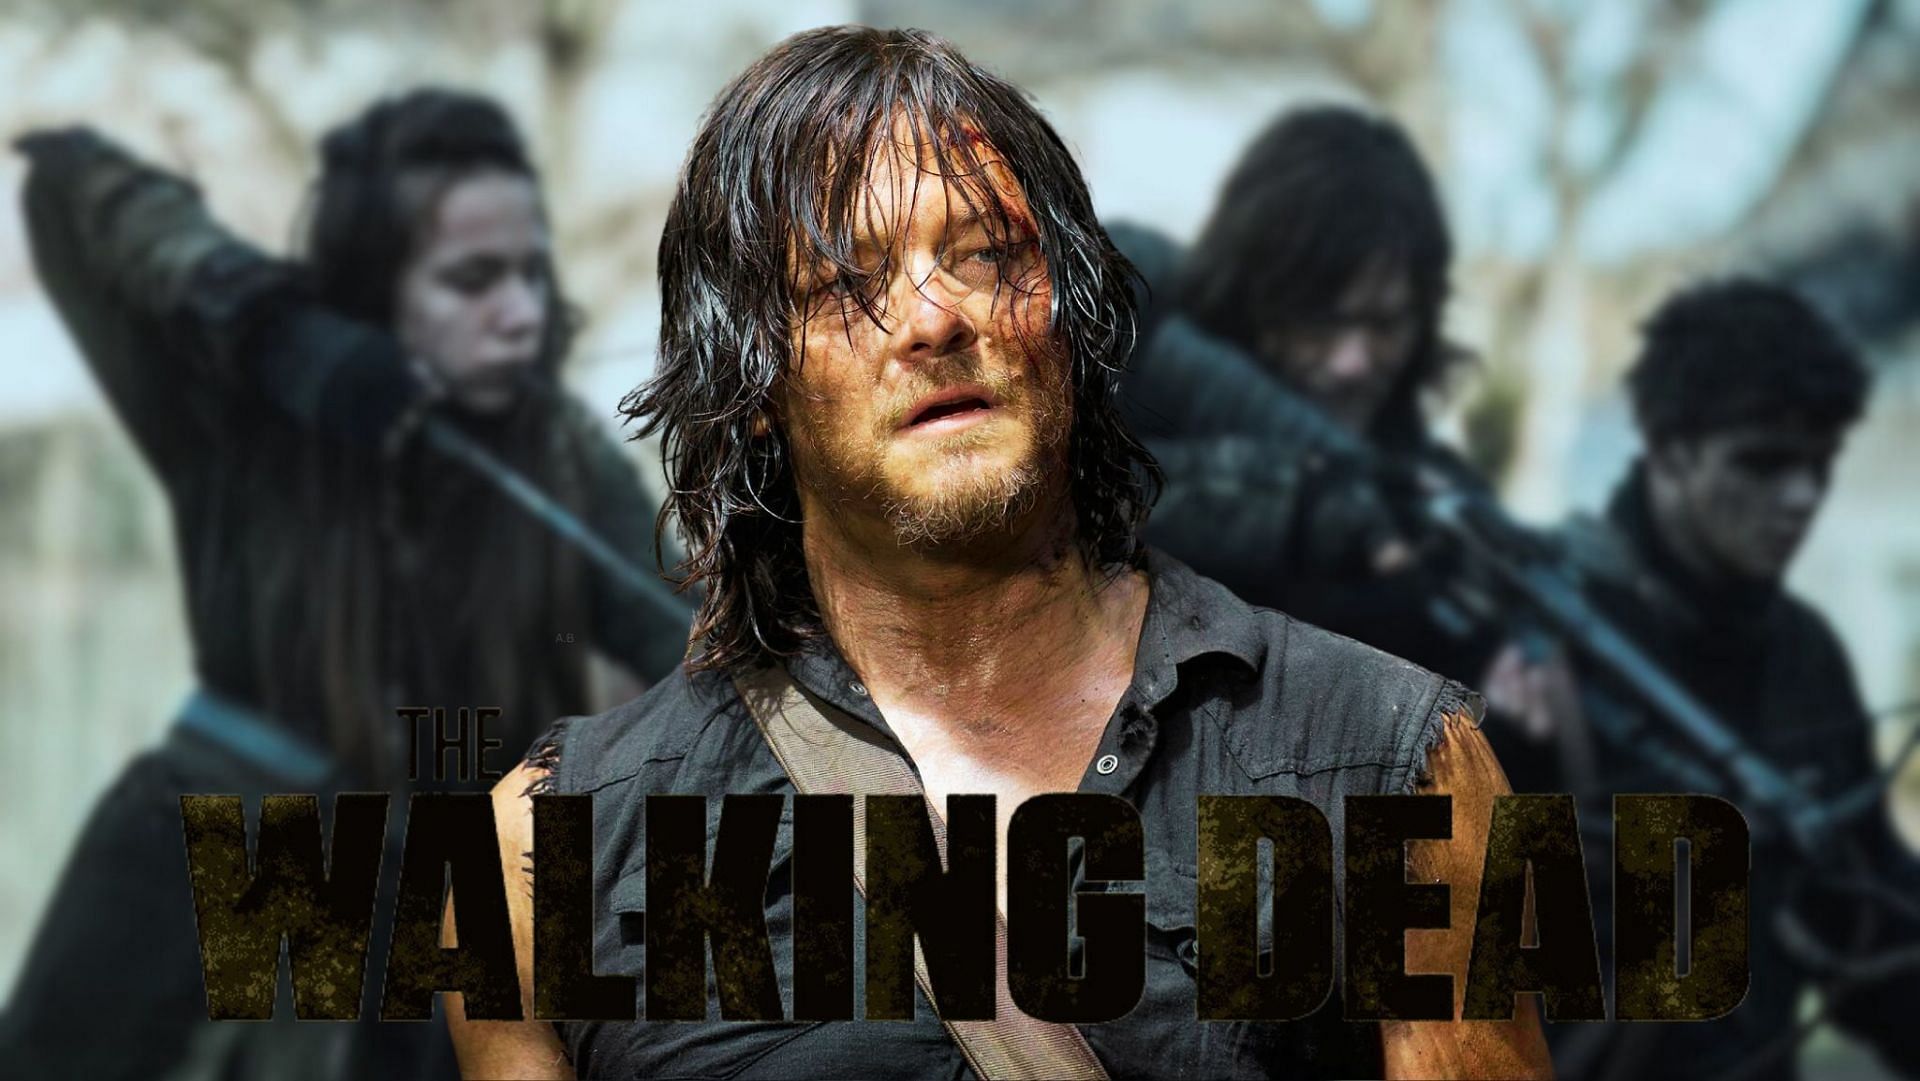 Norman Reedus as Daryl Dixon in the upcoming spinoff: A new journey begins (Image via Sportskeeda)